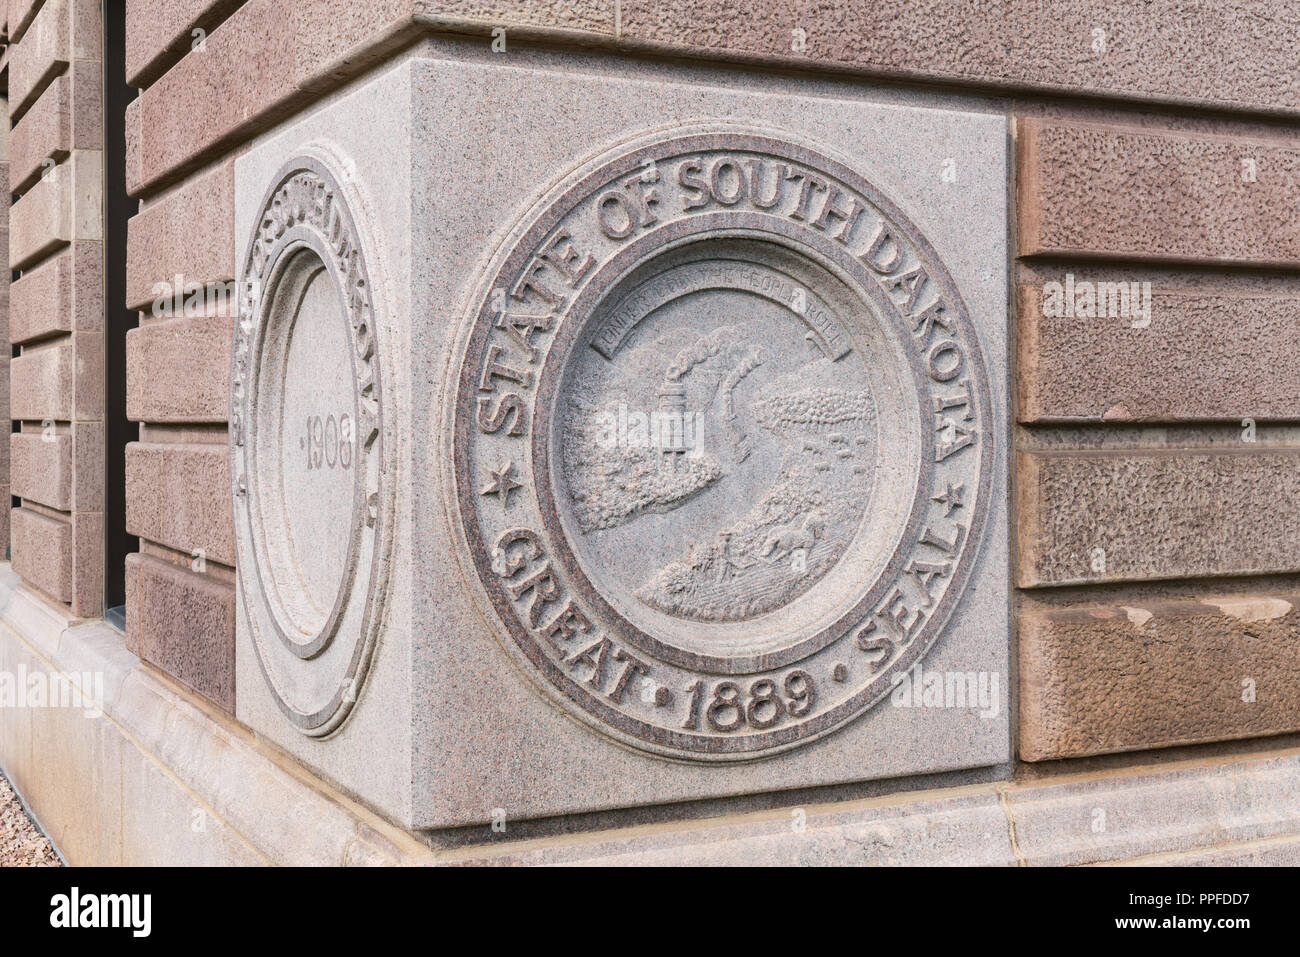 PIERRE, SD - JULY 9, 2018: State Seal of South Dakota on the cornerstone of the Capital Building in Pierre, SD Stock Photo